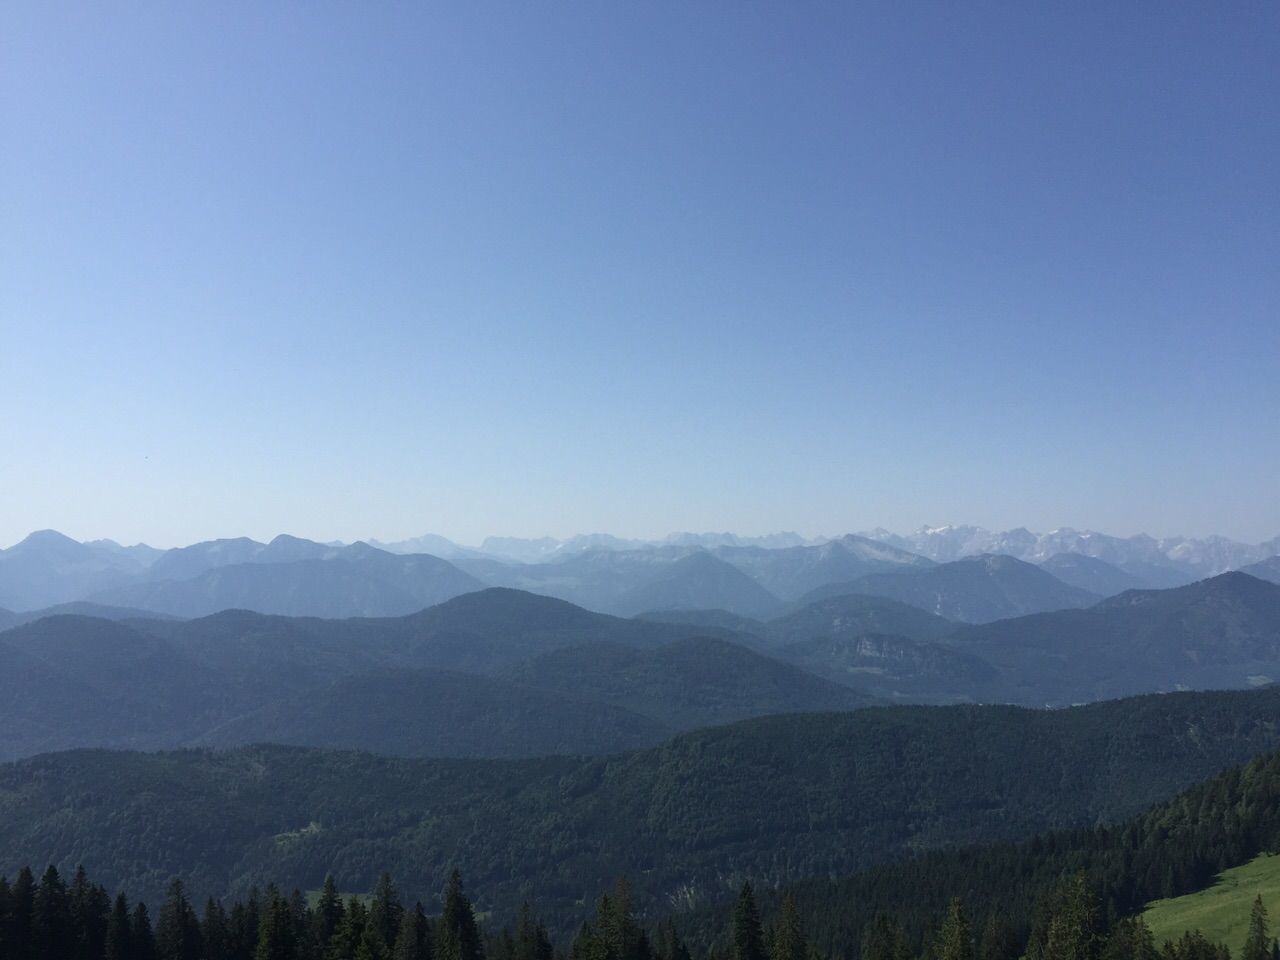 View of tree mountains against clear sky at lenggries